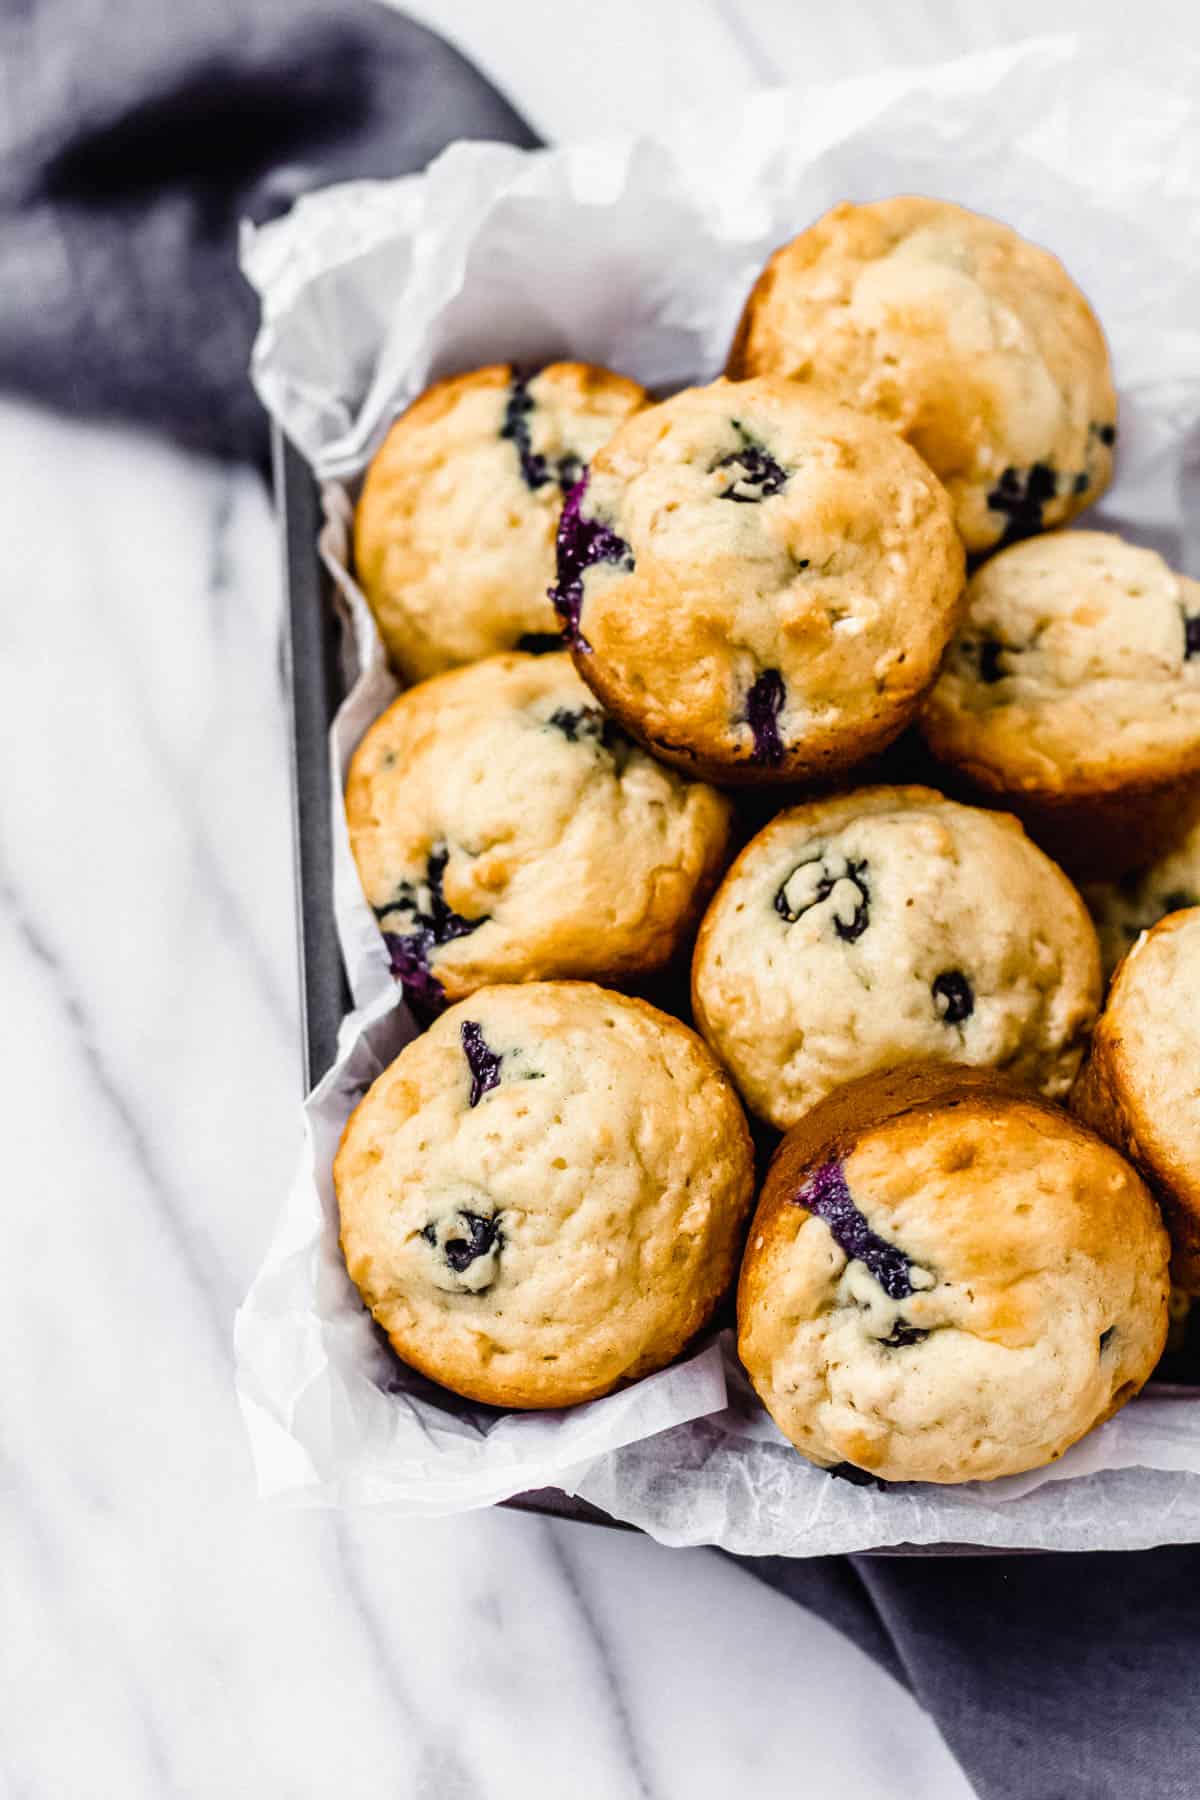 Blueberry oat muffins in a parchment paper lined tray with a gray towel under it on a marble backdrop